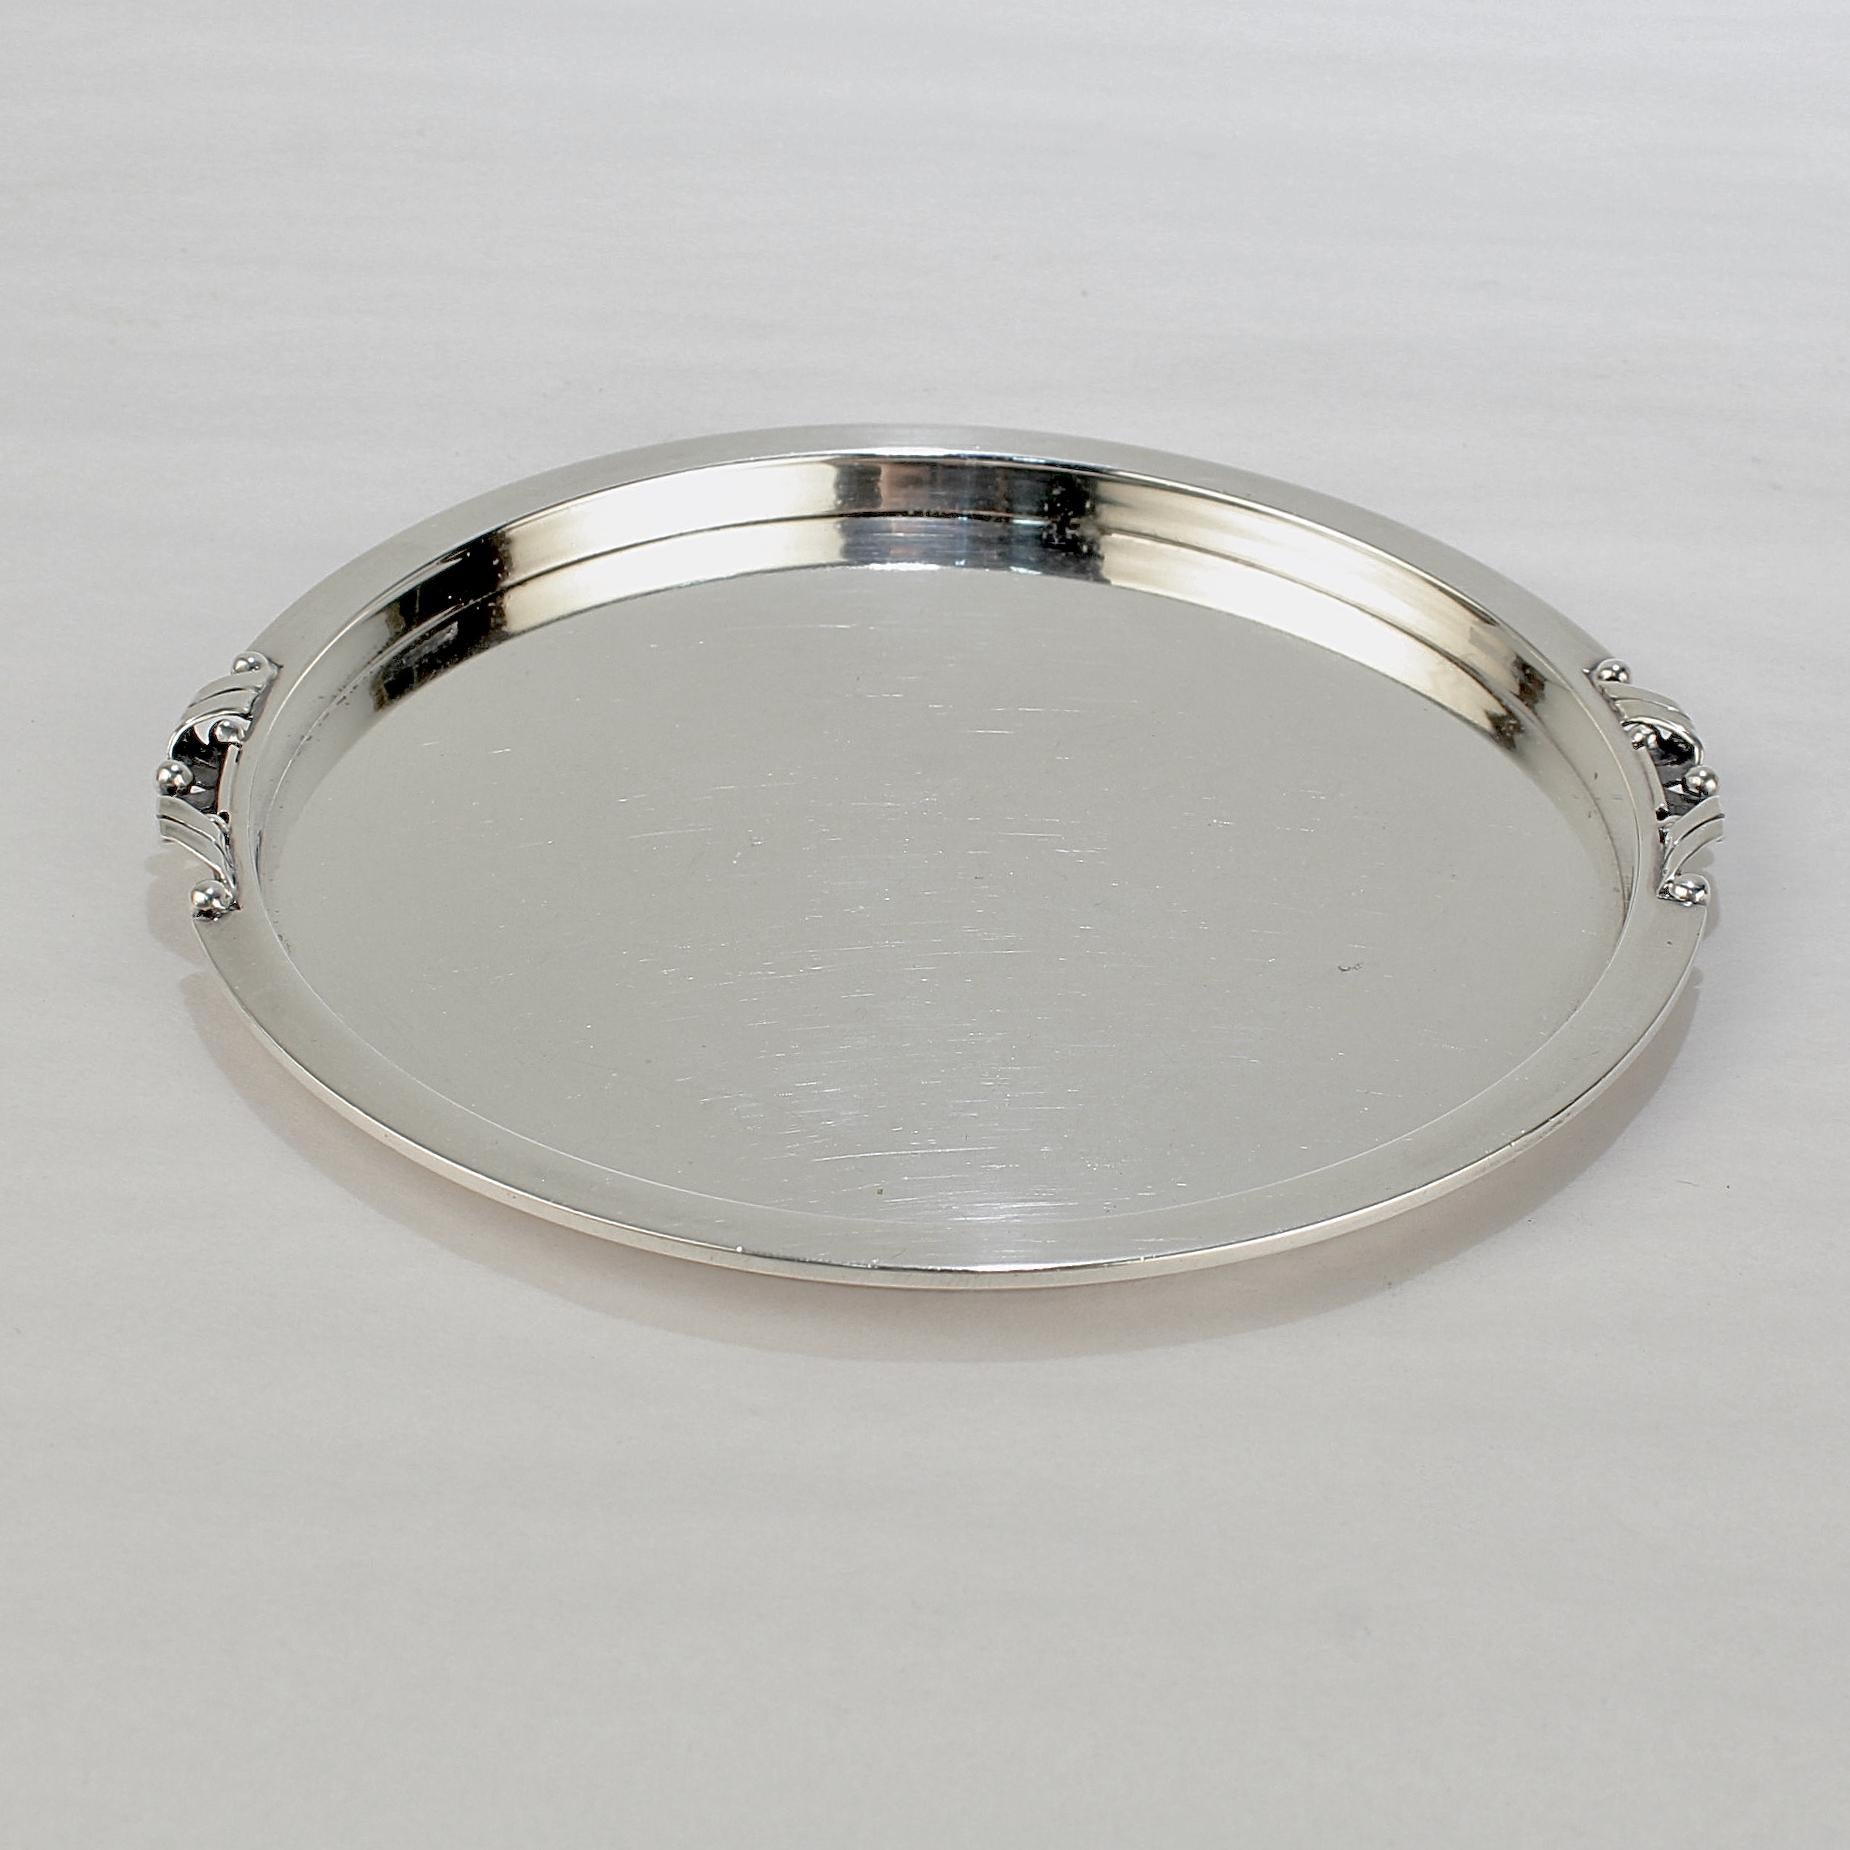 Women's or Men's Art Deco Georg Jensen Sterling Silver Small Tray or Dish No. 639